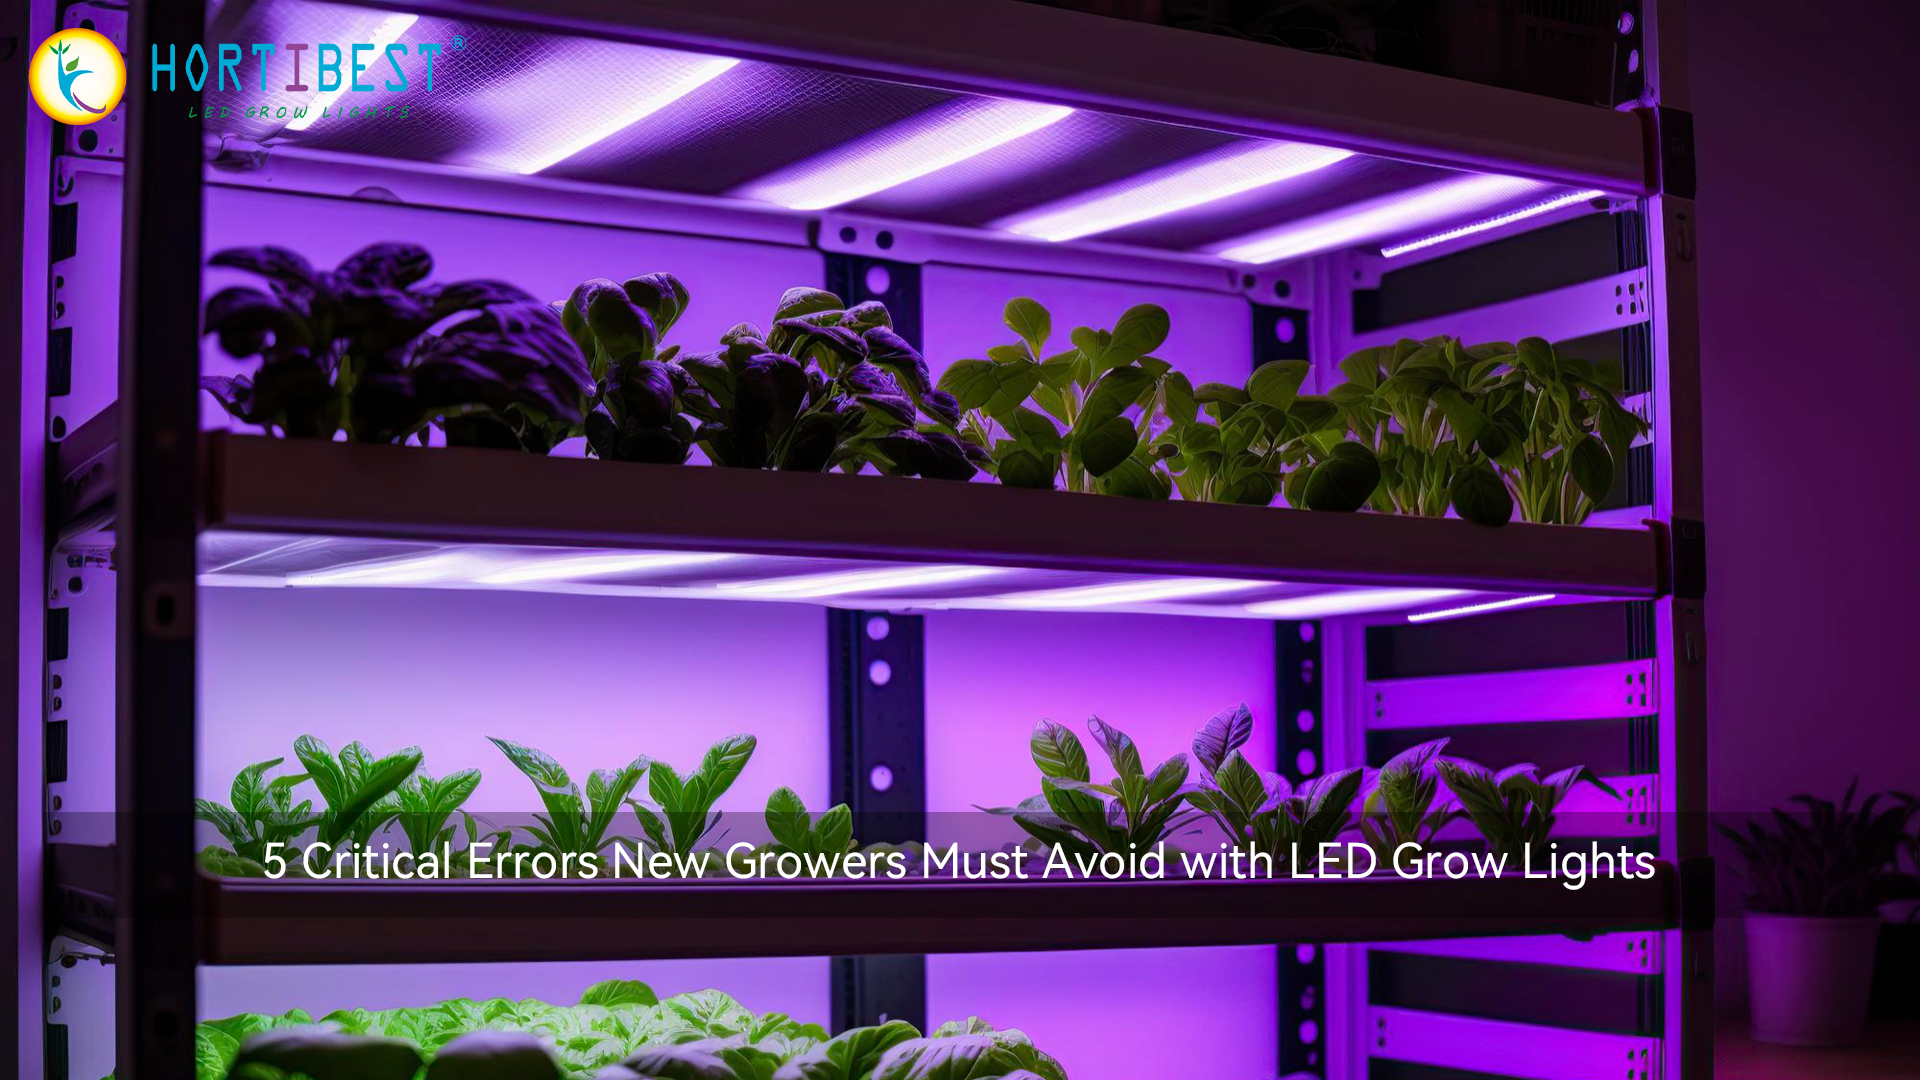 5 Critical Errors New Growers Must Avoid with LED Grow Lights